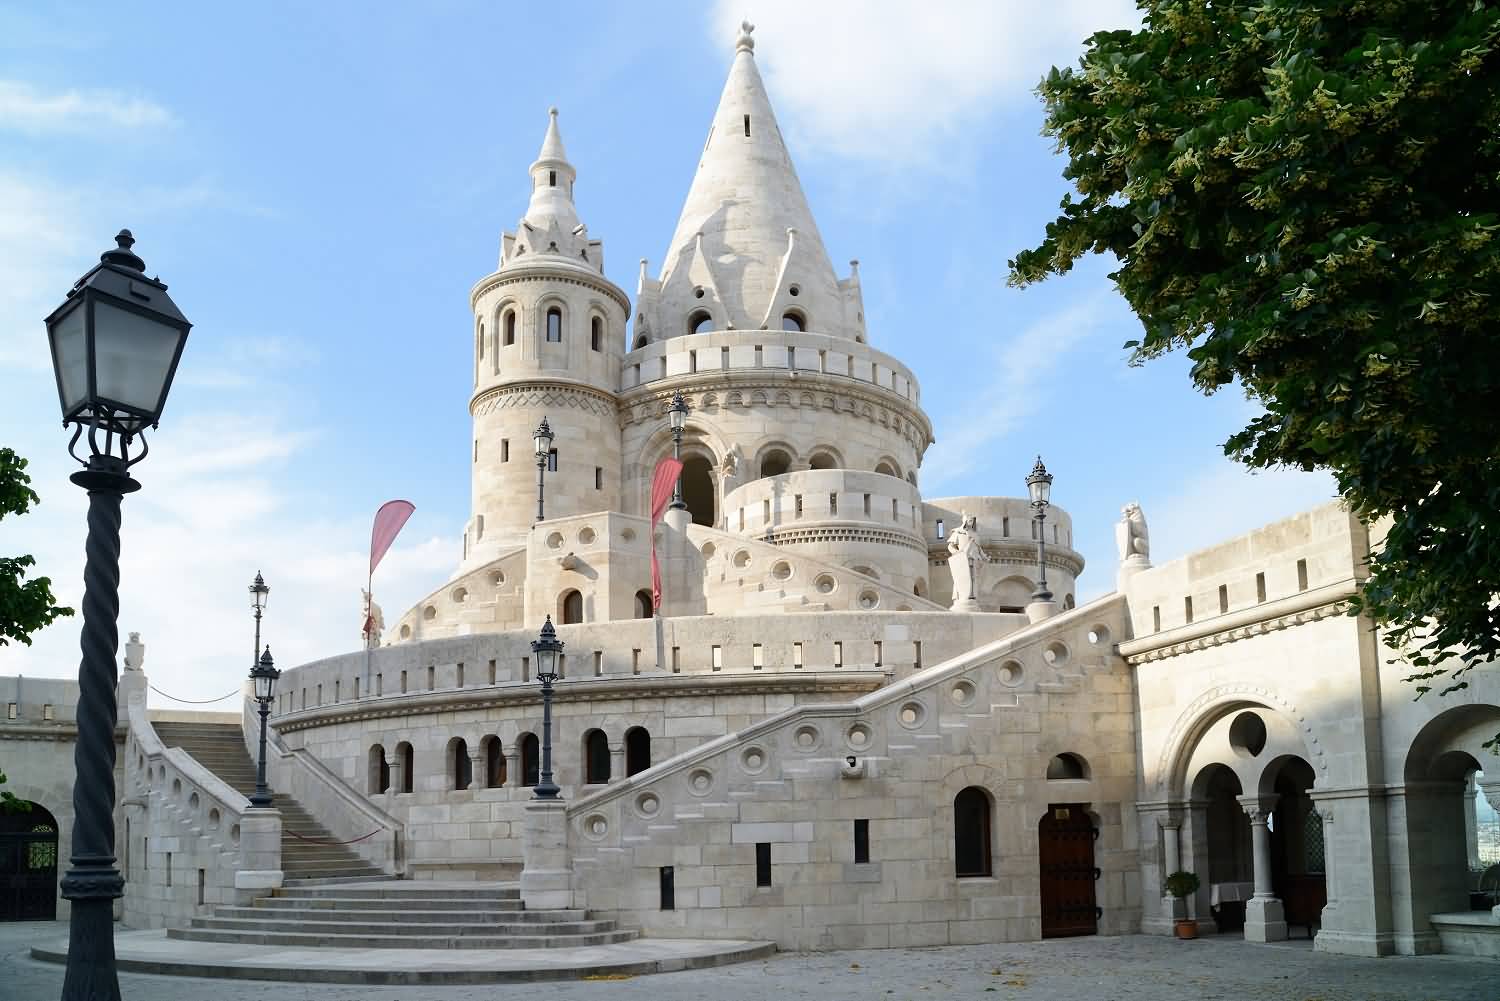 Beautiful Picture Of The Fisherman’s Bastion In Budapest